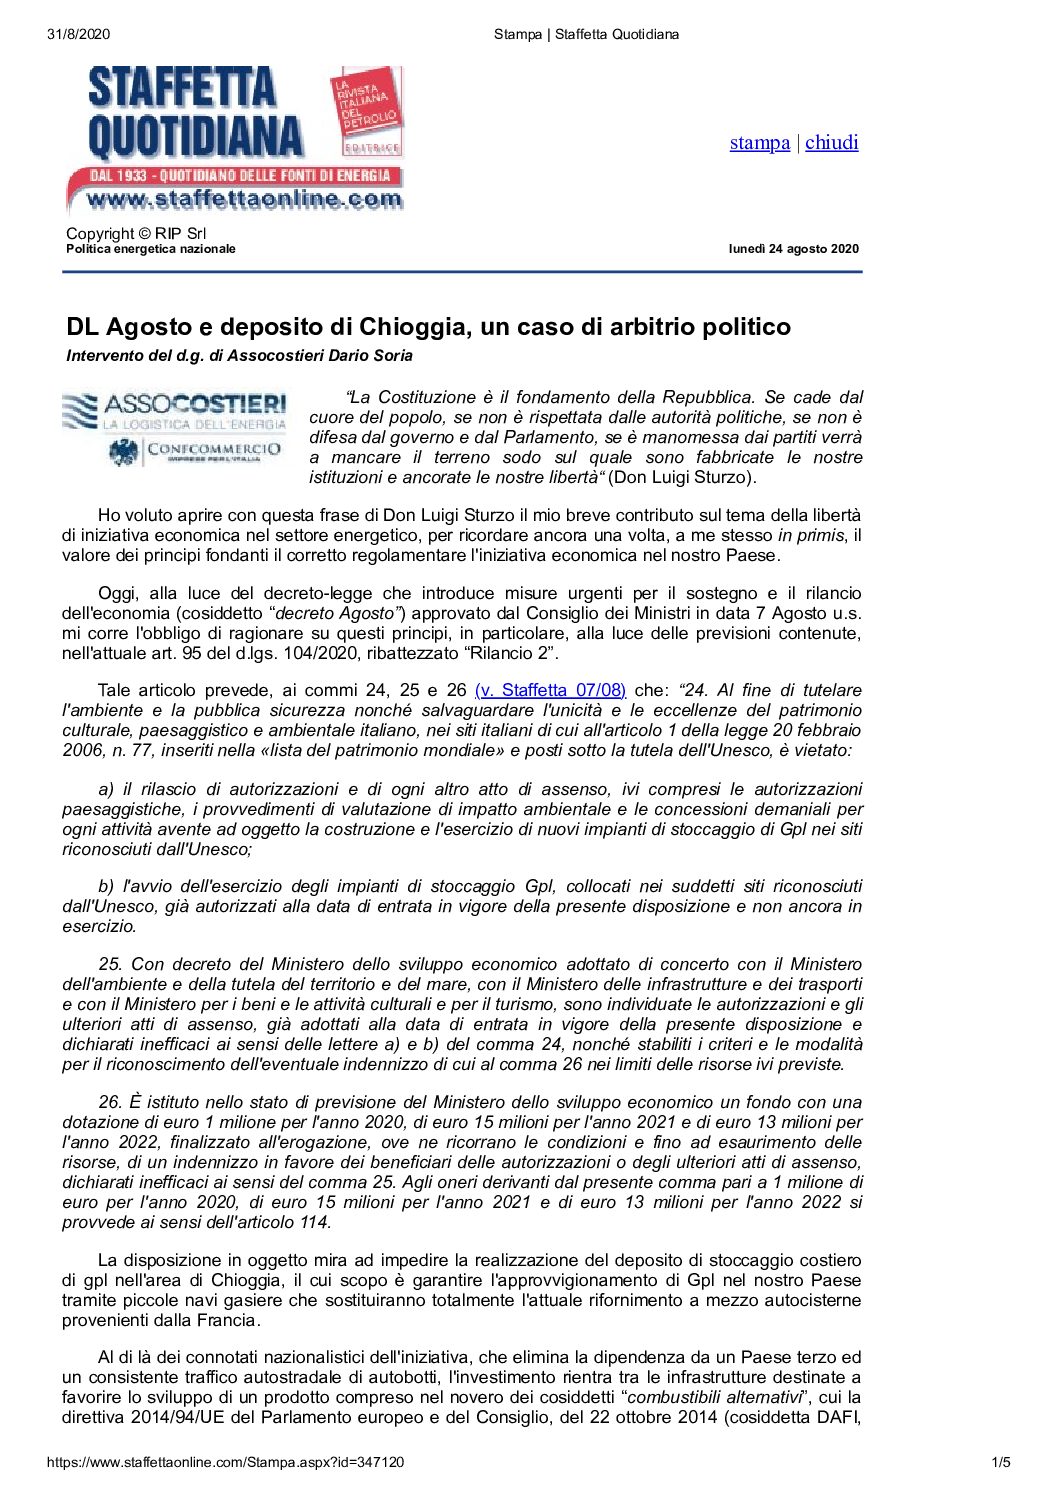 24.08.2020 – DL August and deposit of Chioggia, a case of political arbitration